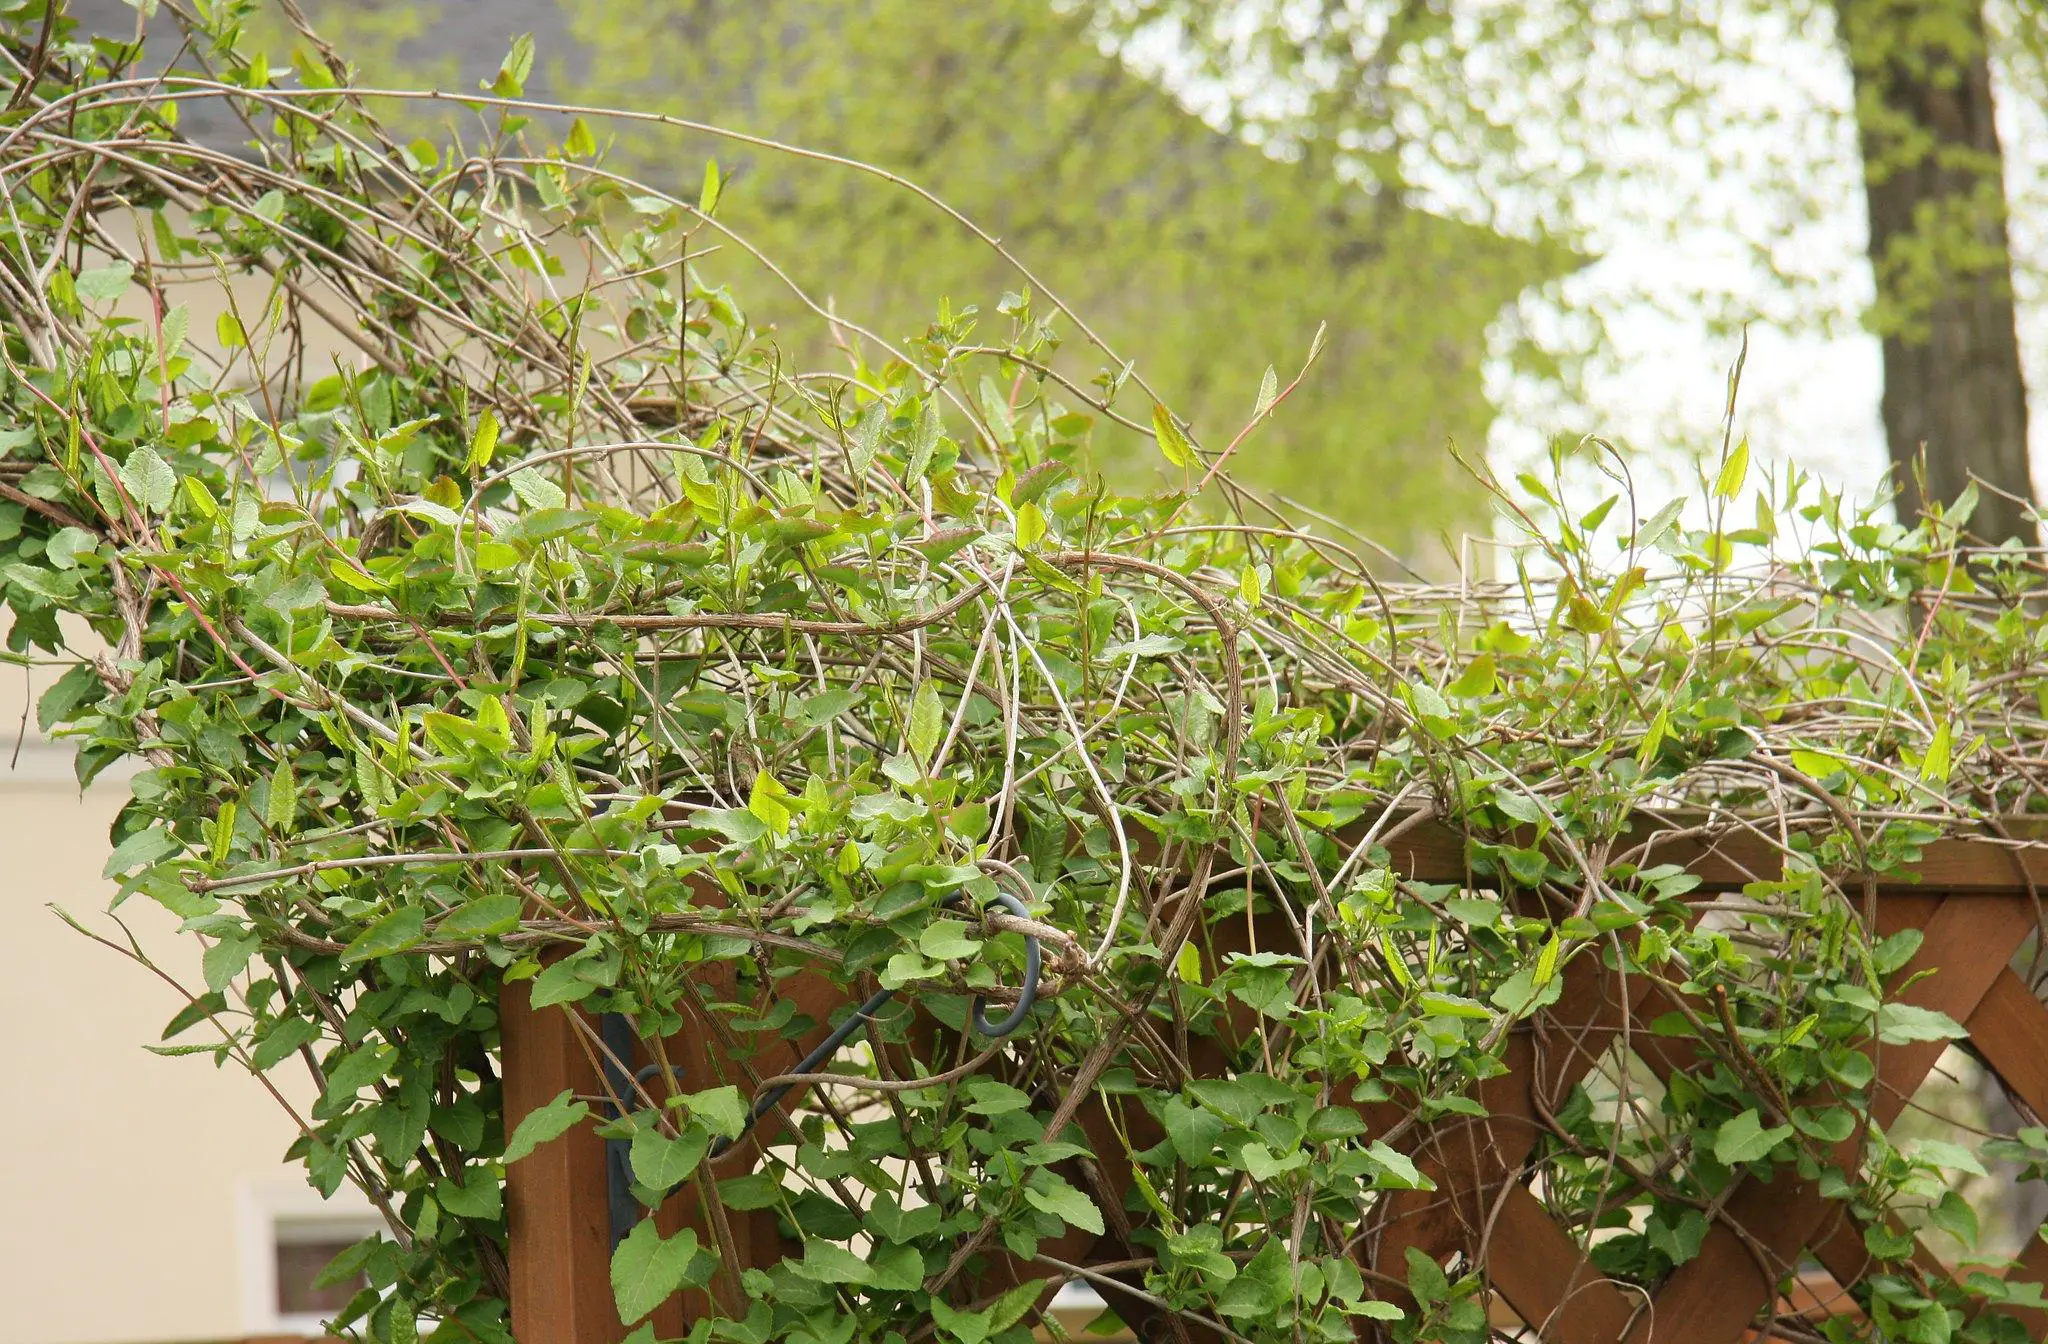 Russian vine grows aggressively whilst clinging to any surface